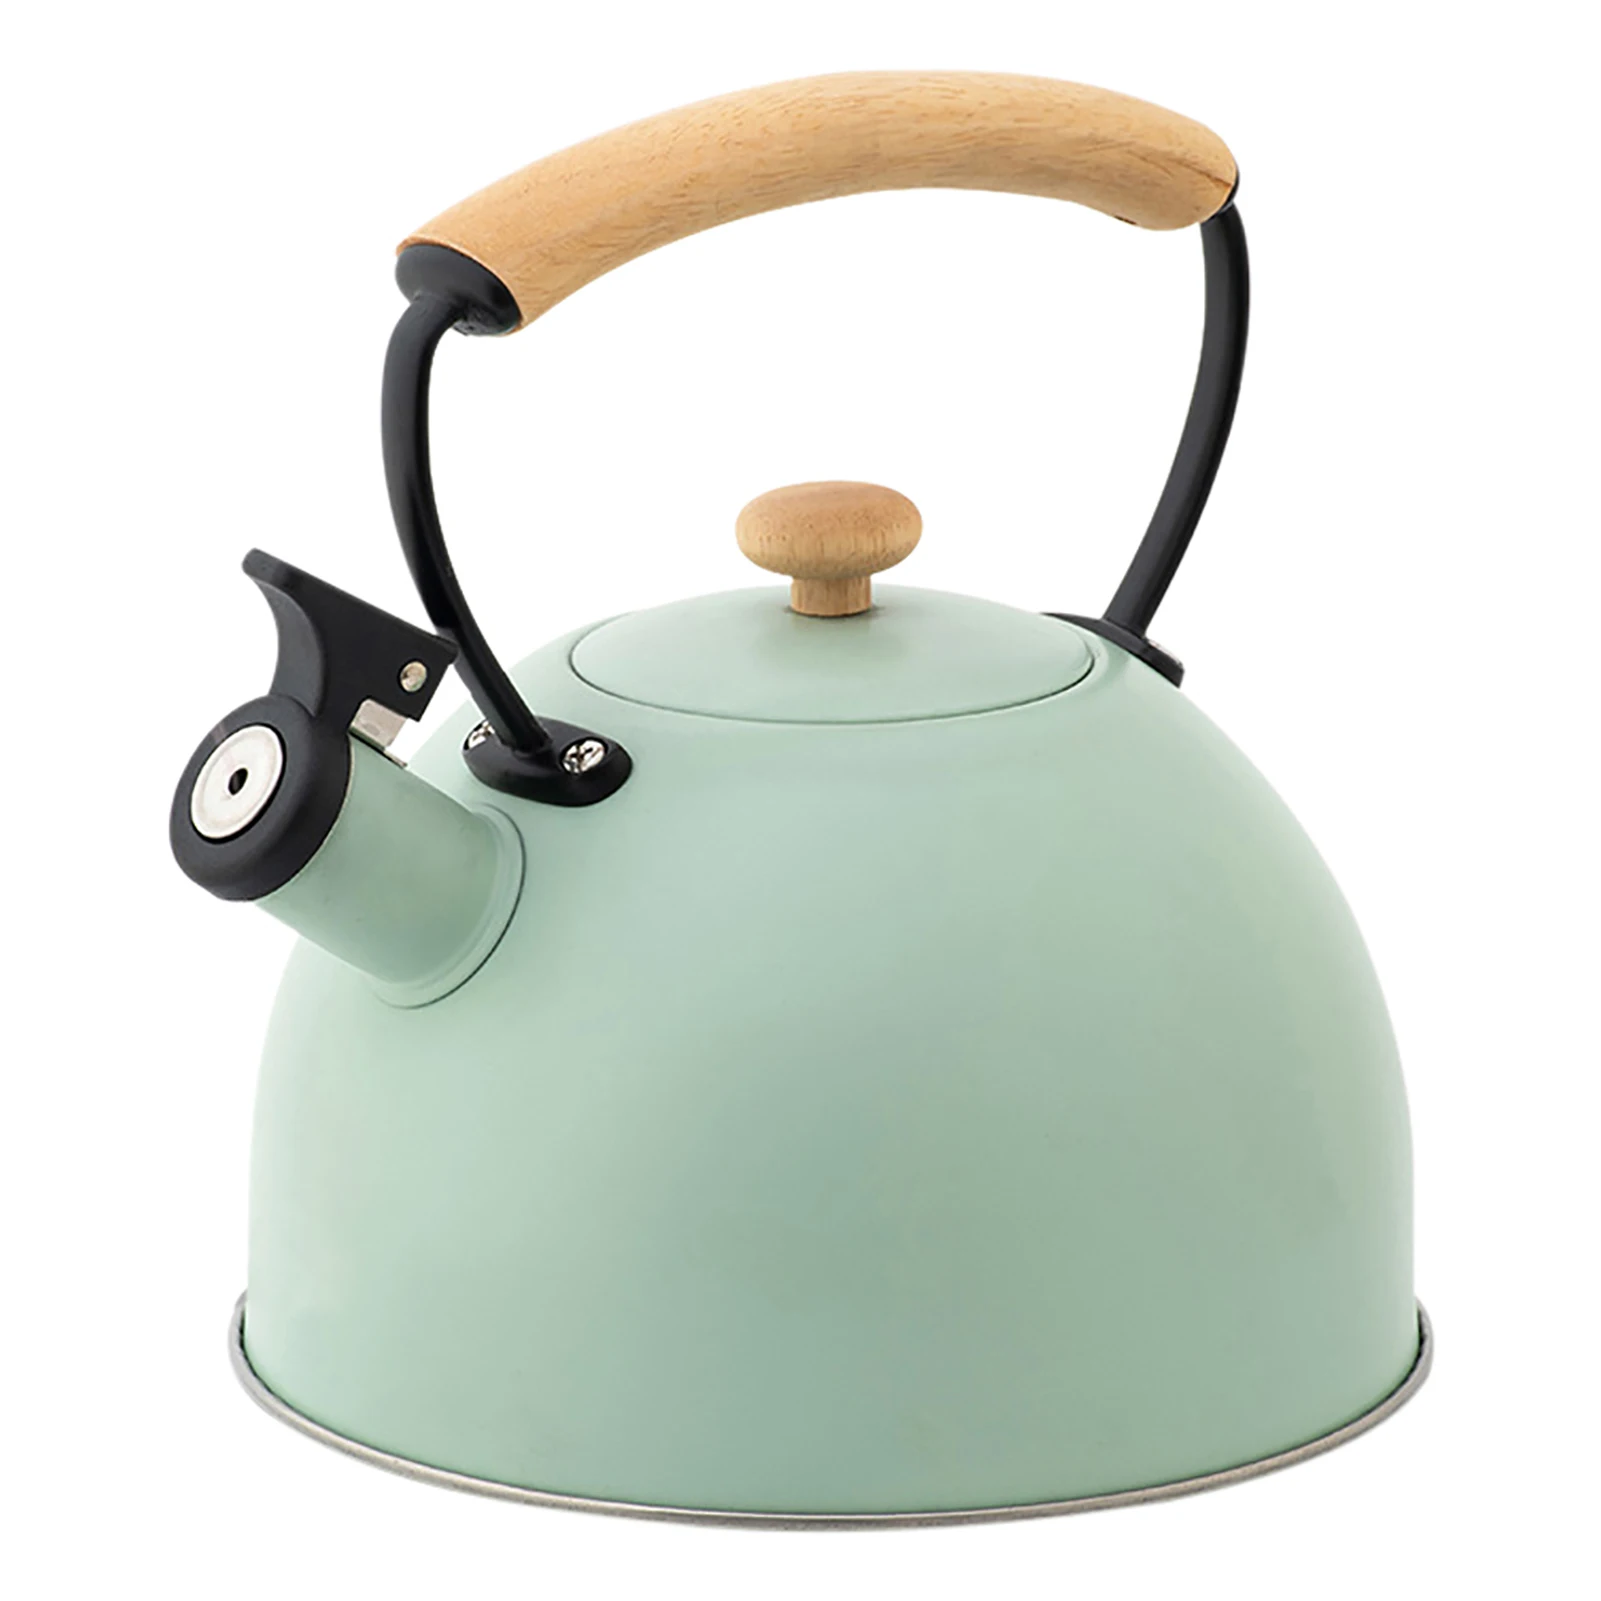 

Whistling Teapot For Stovetop Loud Whistle Tea Pots For Stove Top Induction Hot Water Kettle With Anti-Scald Handle 3 Liters